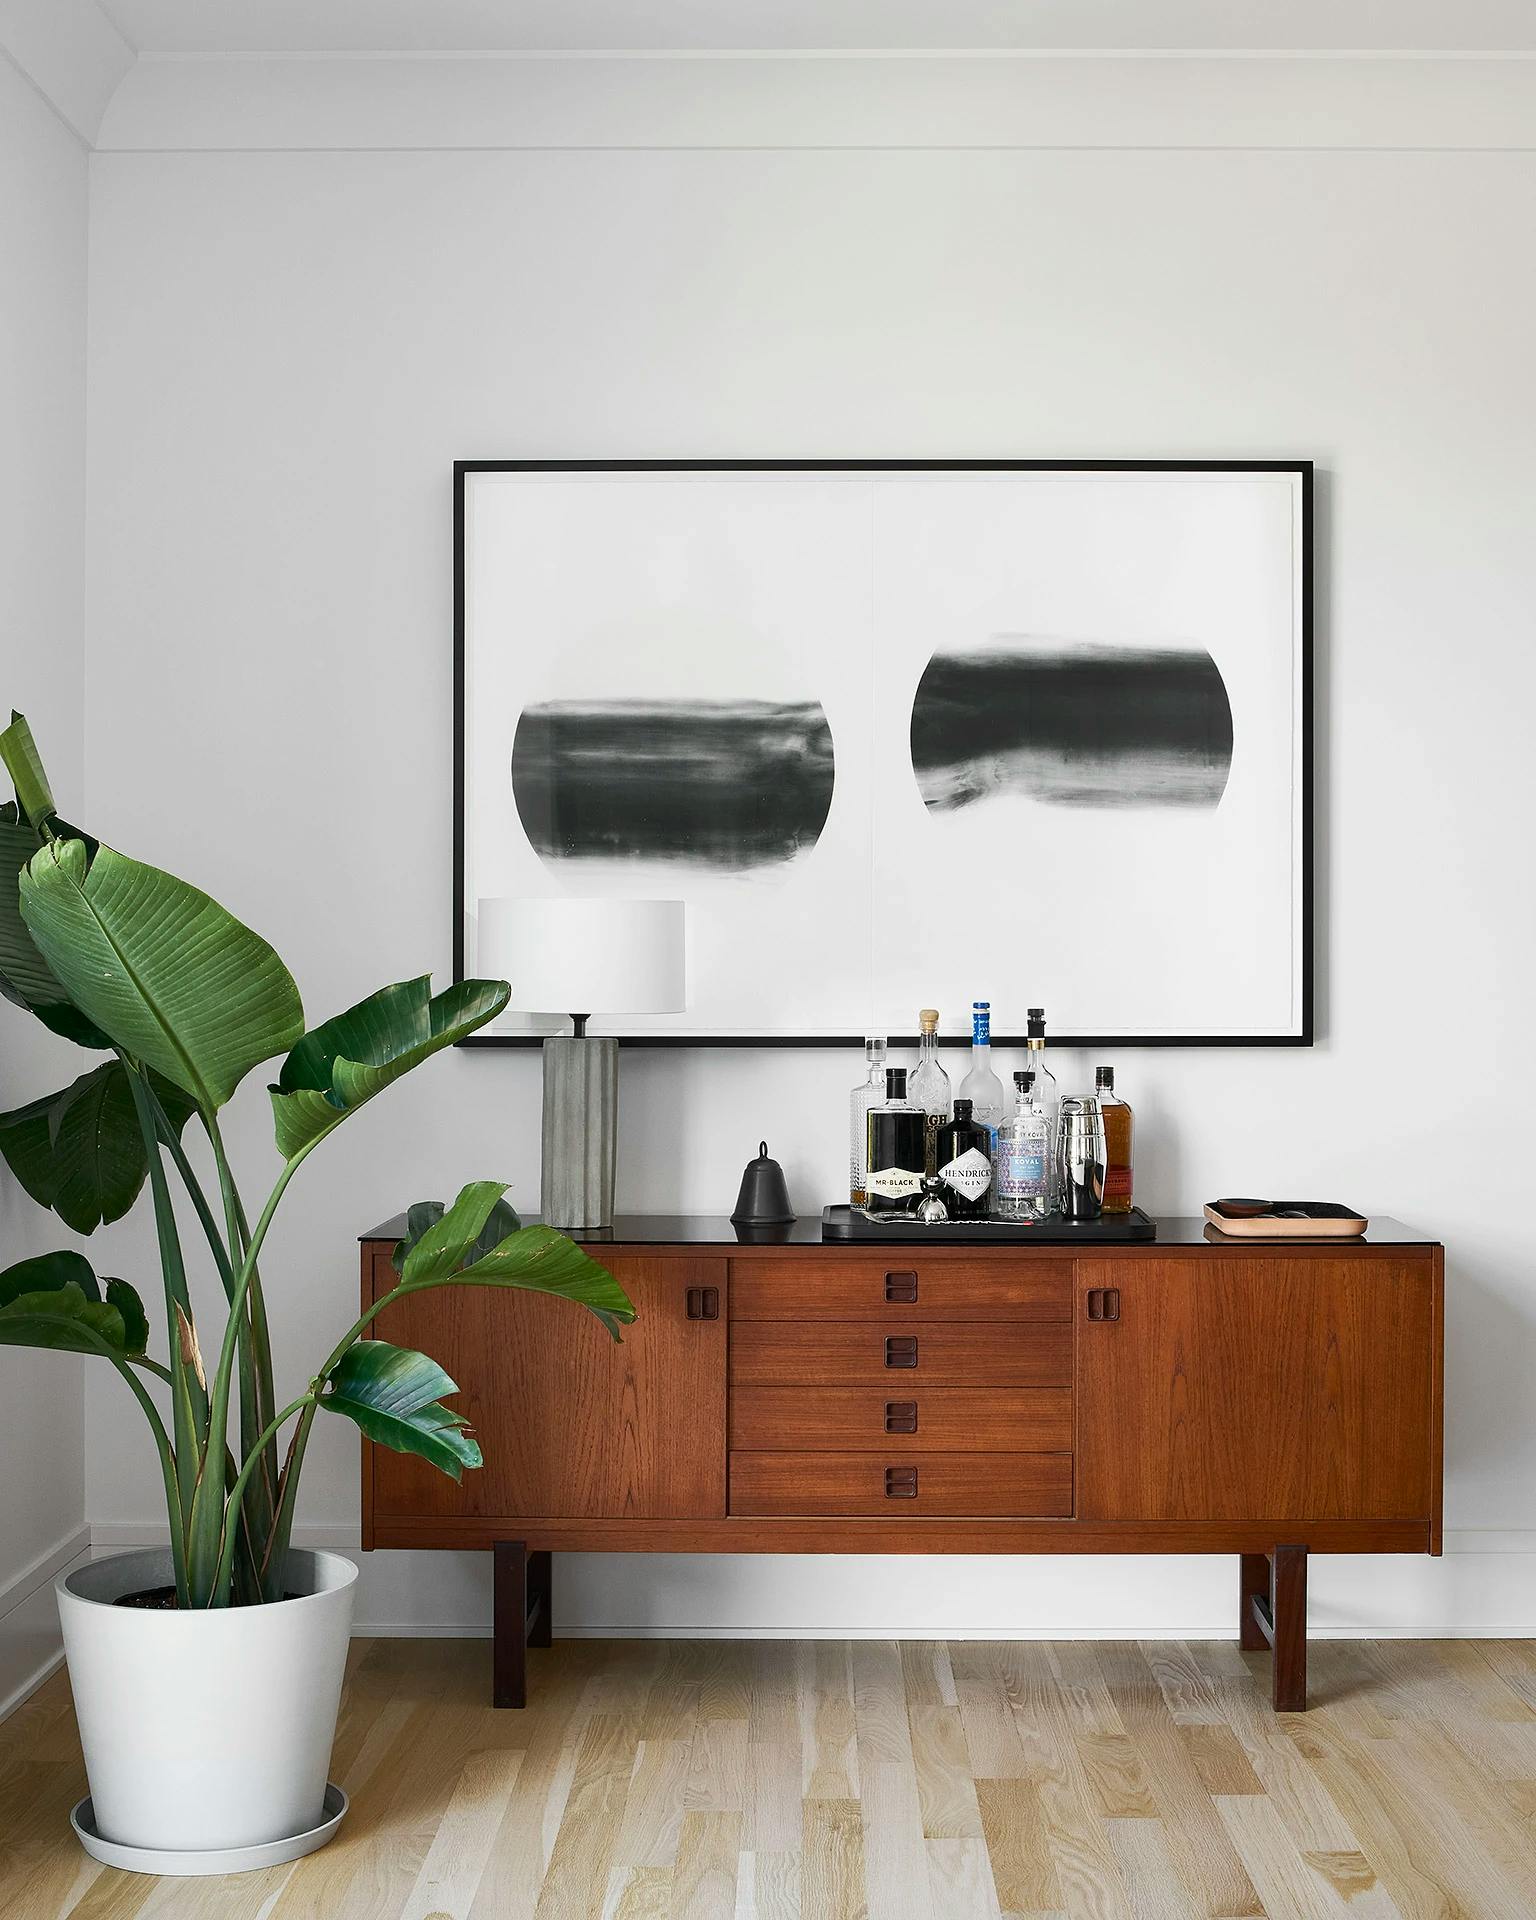 A framed screenprint of two black and white circles by artist Keiko Kamata installed over a wooden console in a Chicago apartment.